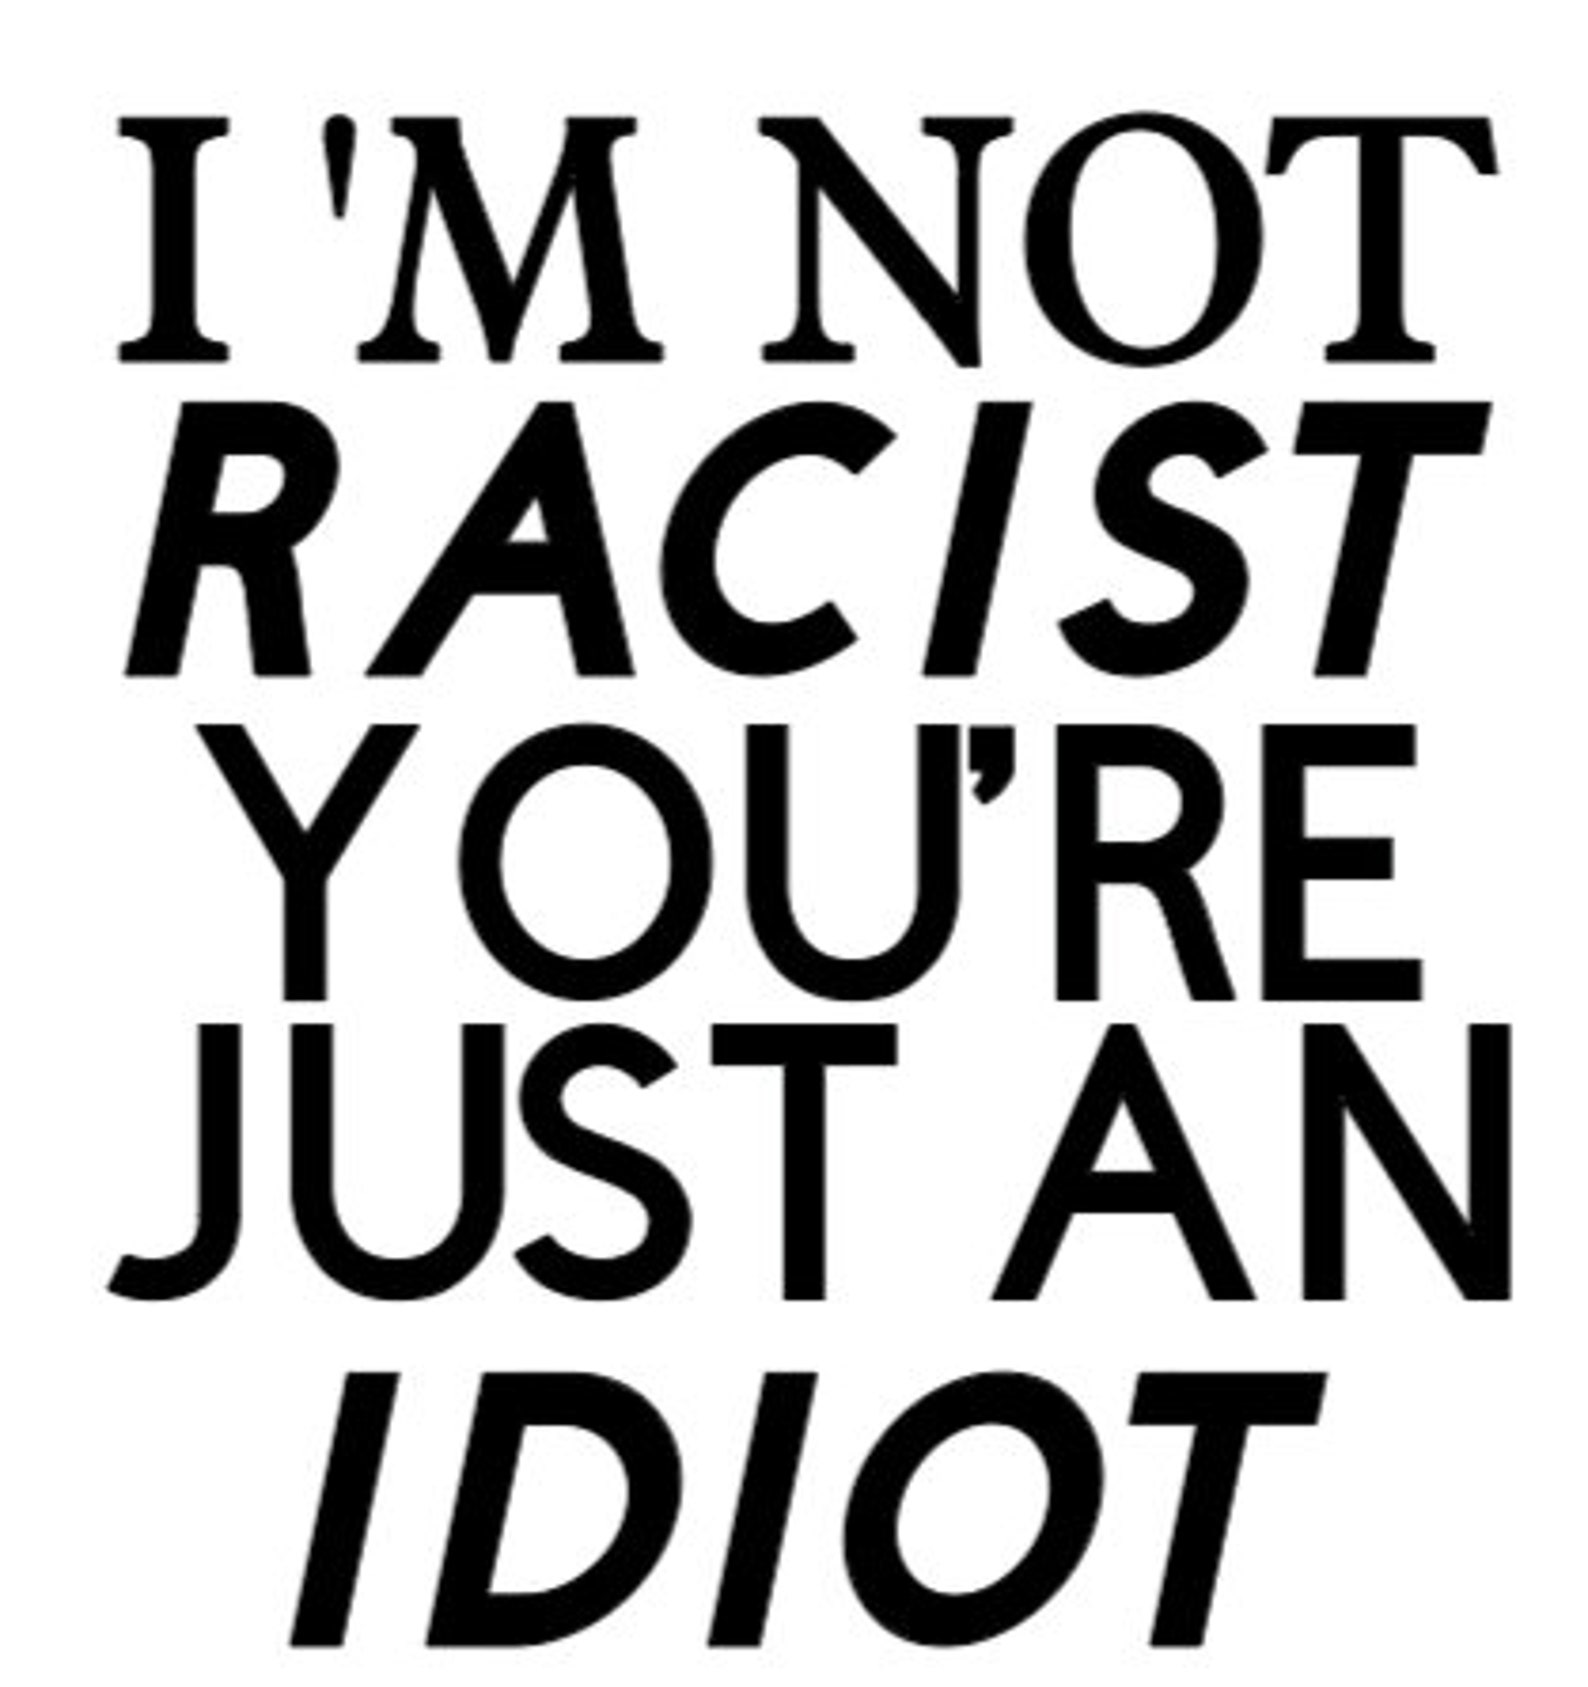 I'm not racist you're just an idiot | Etsy